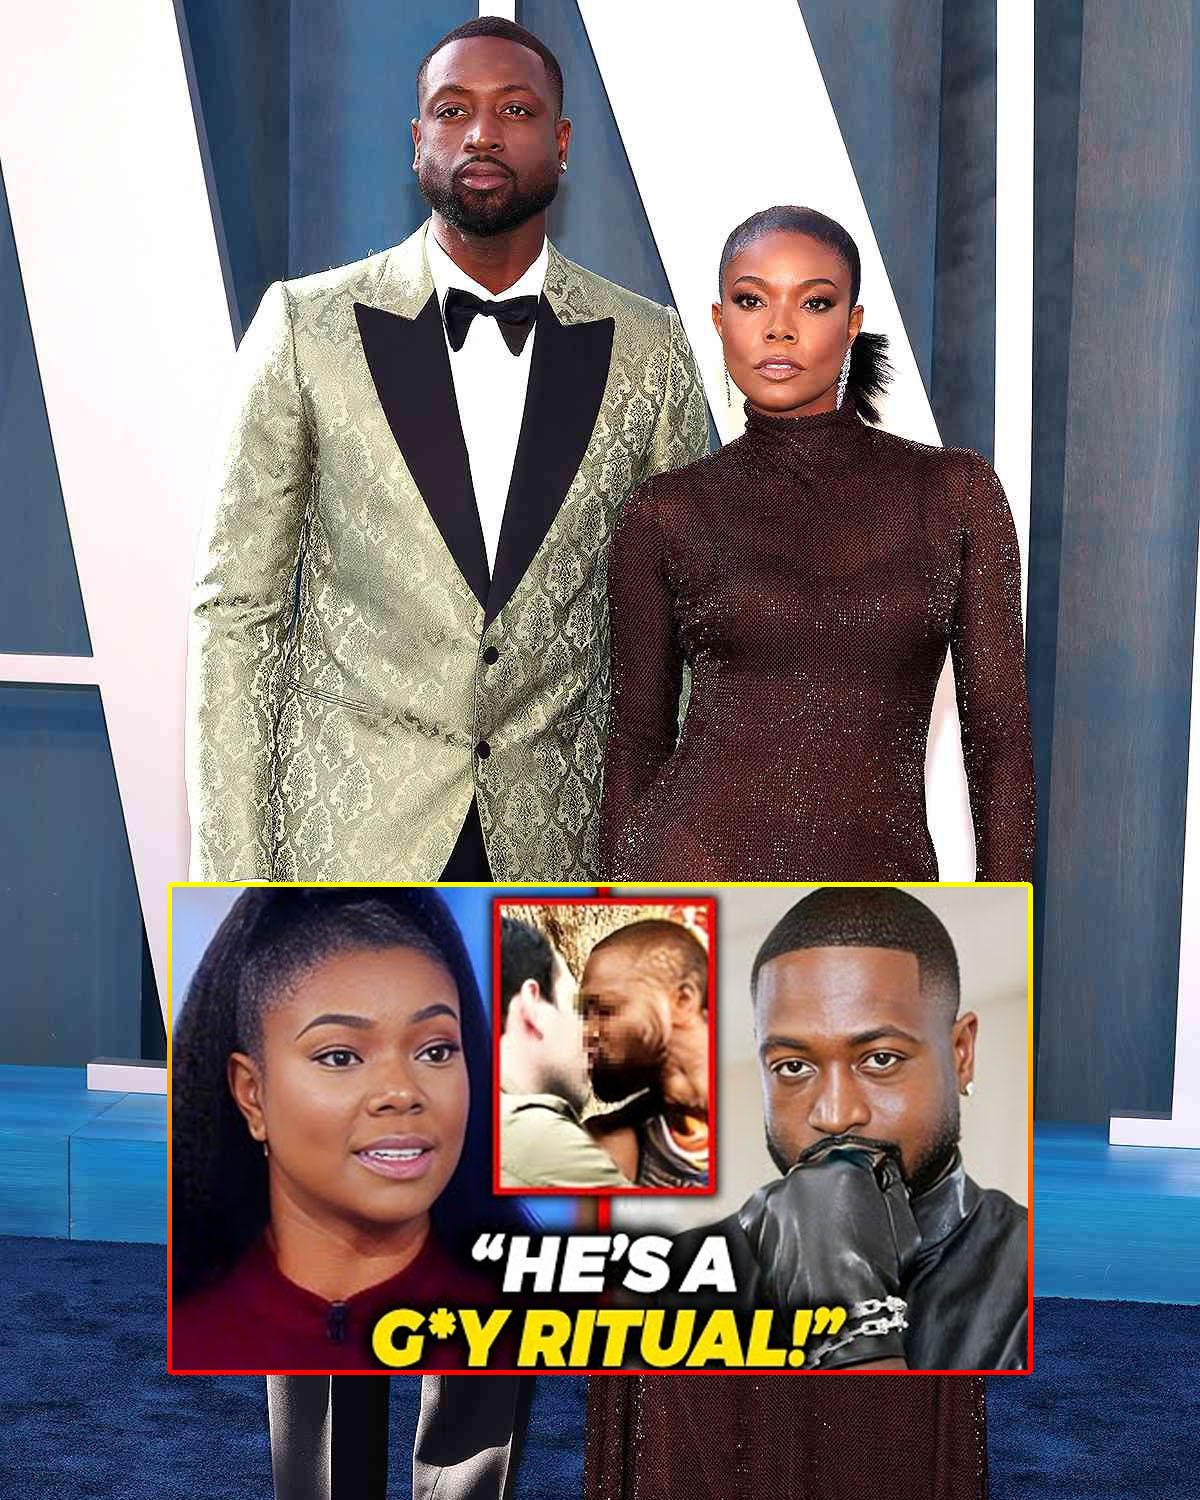 7 MINUTES AGO: Gabrielle Union Exposed Dwayne Wade Gay Boyfriend And ...